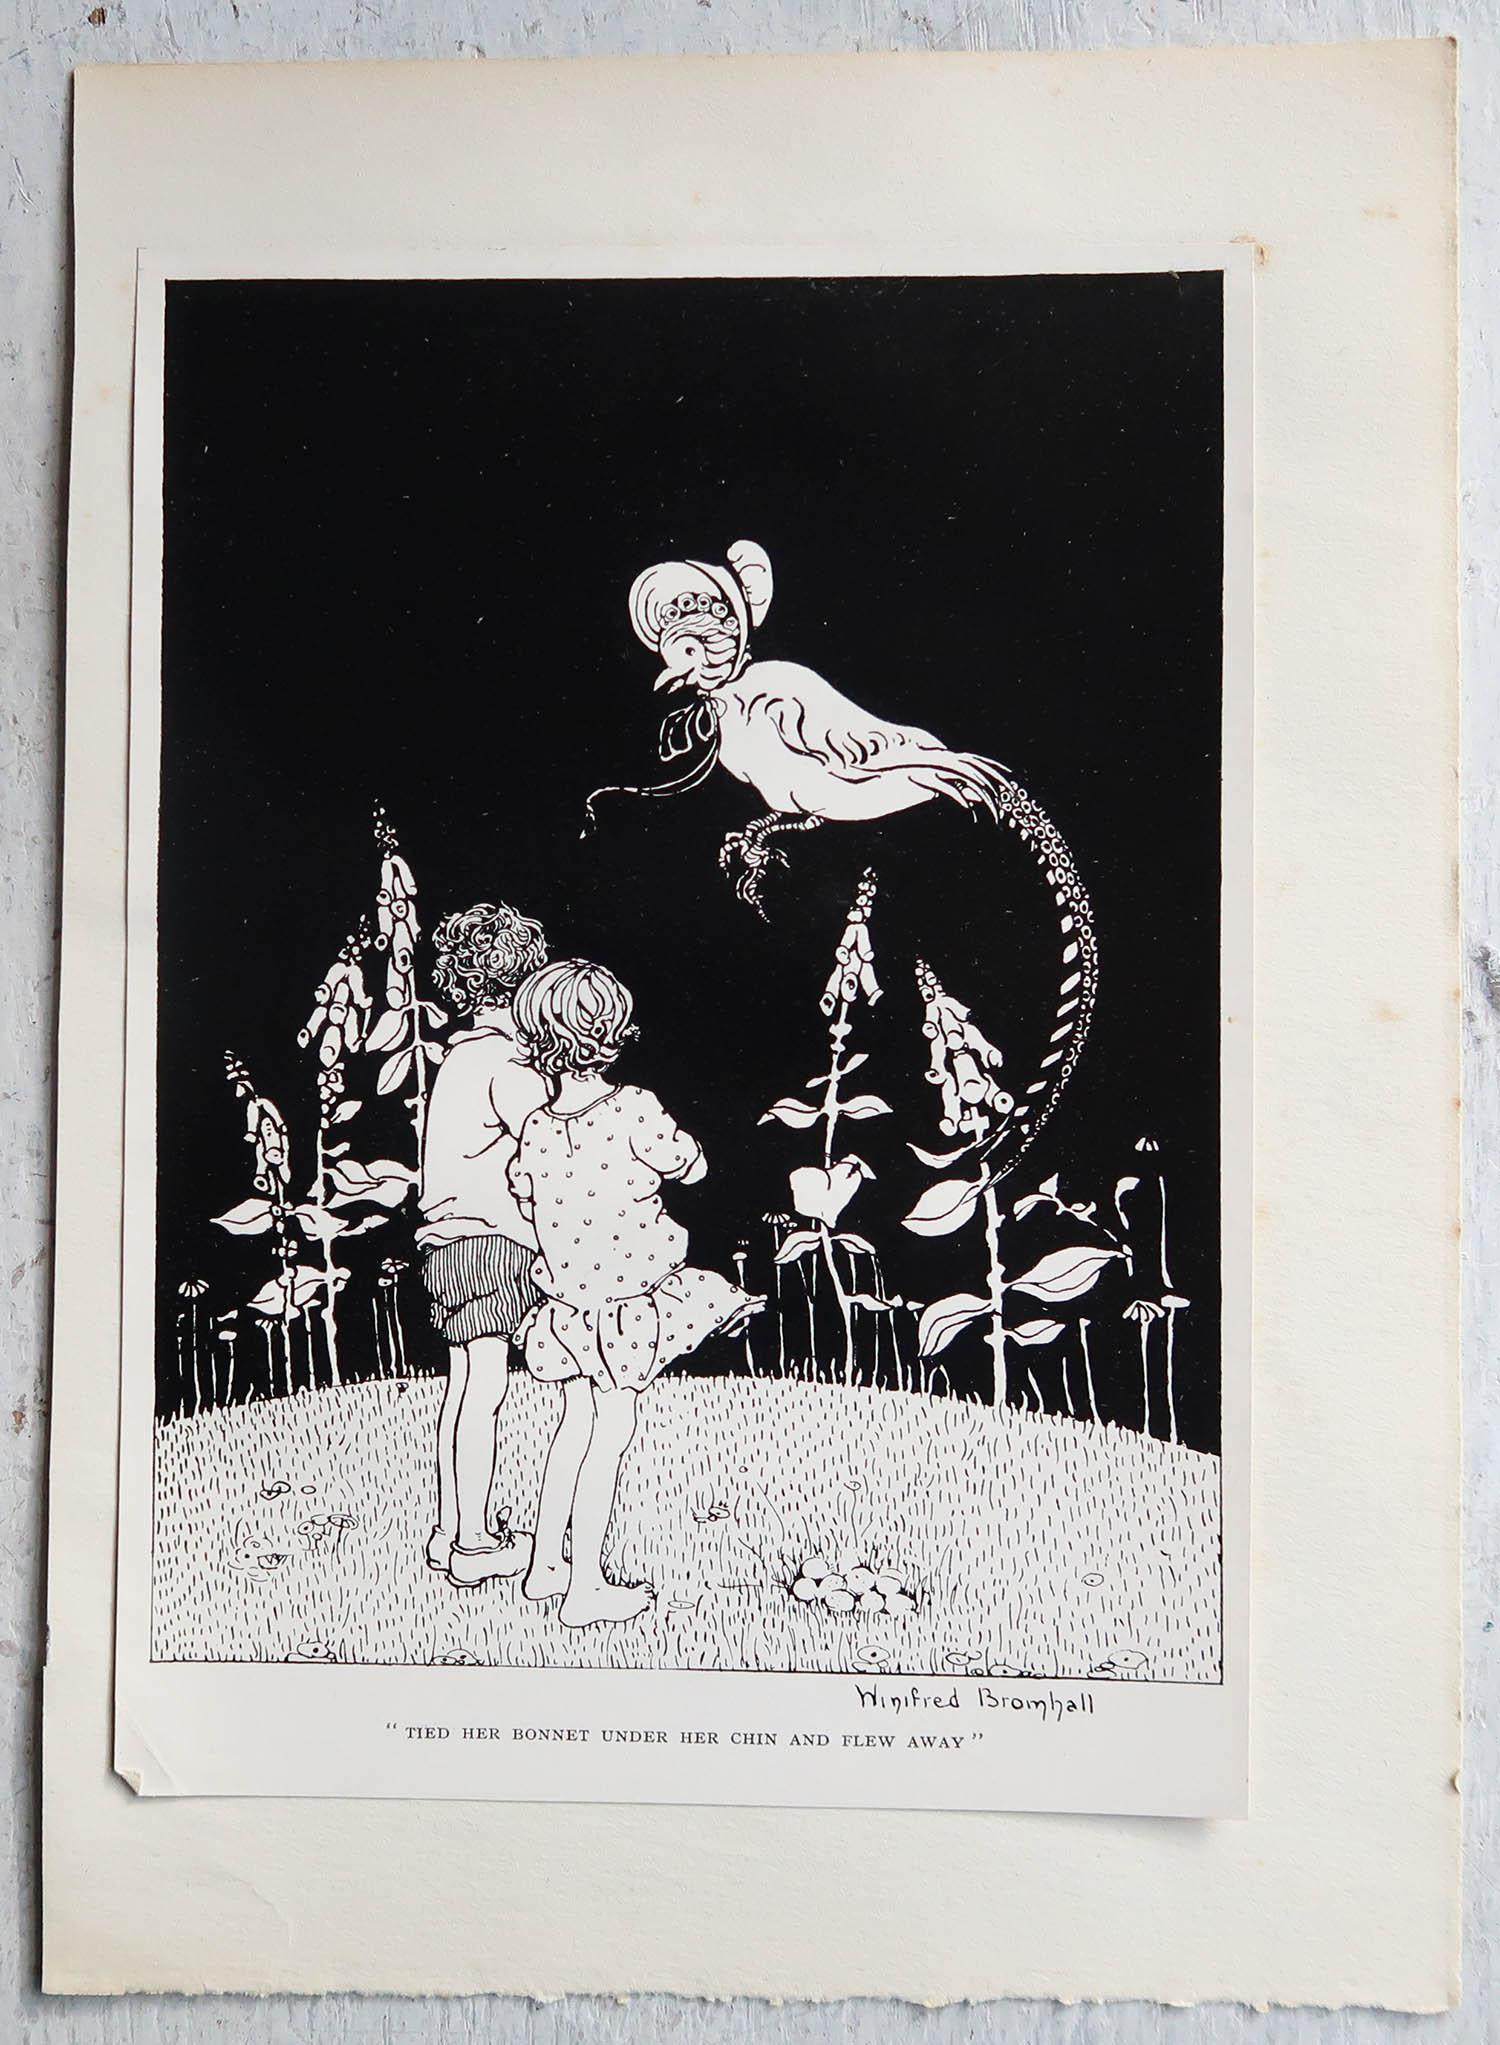 Other Set of 6 Original Vintage Prints After Winifred Bromhall, Children, Fairies